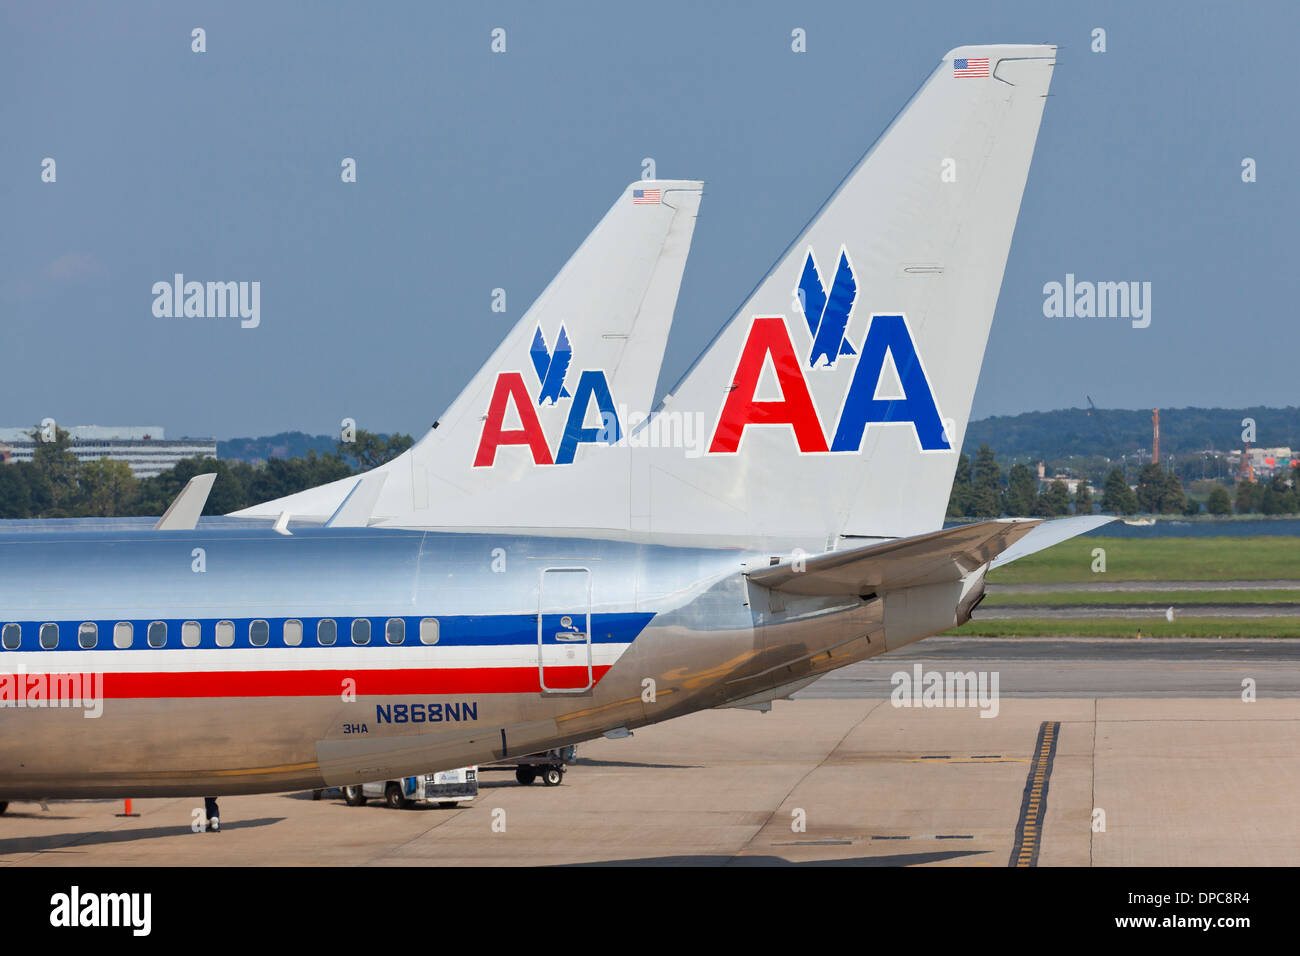 Vertical stabilizers of parked American Airlines jets - Ronald Reagan National Airport - Washington, DC USA Stock Photo